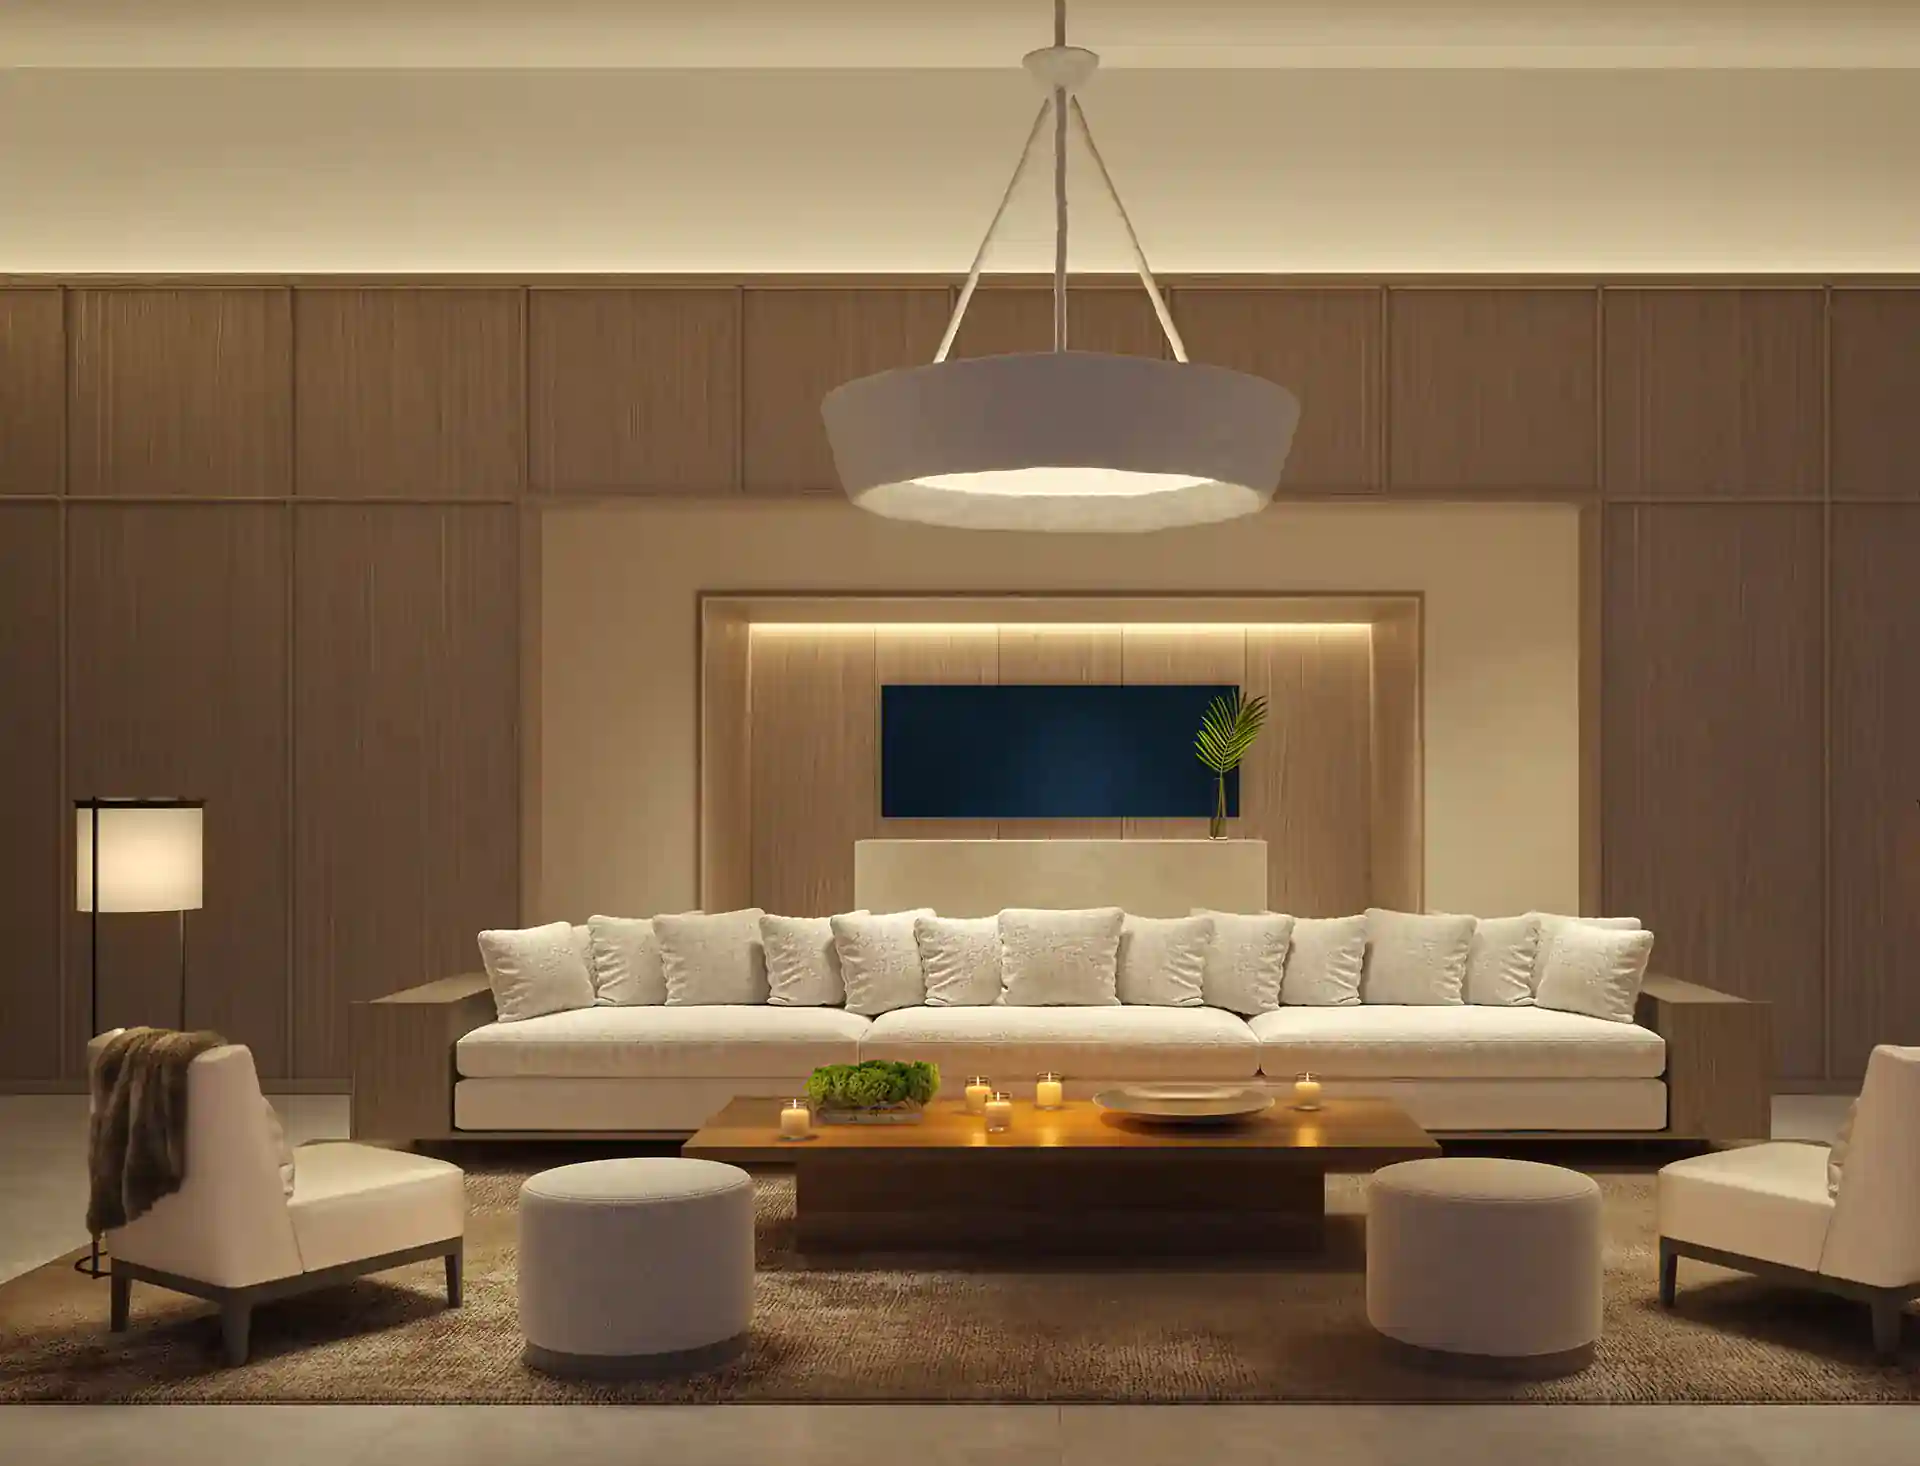 Well-decorated living area of the residence with beautiful hanging light